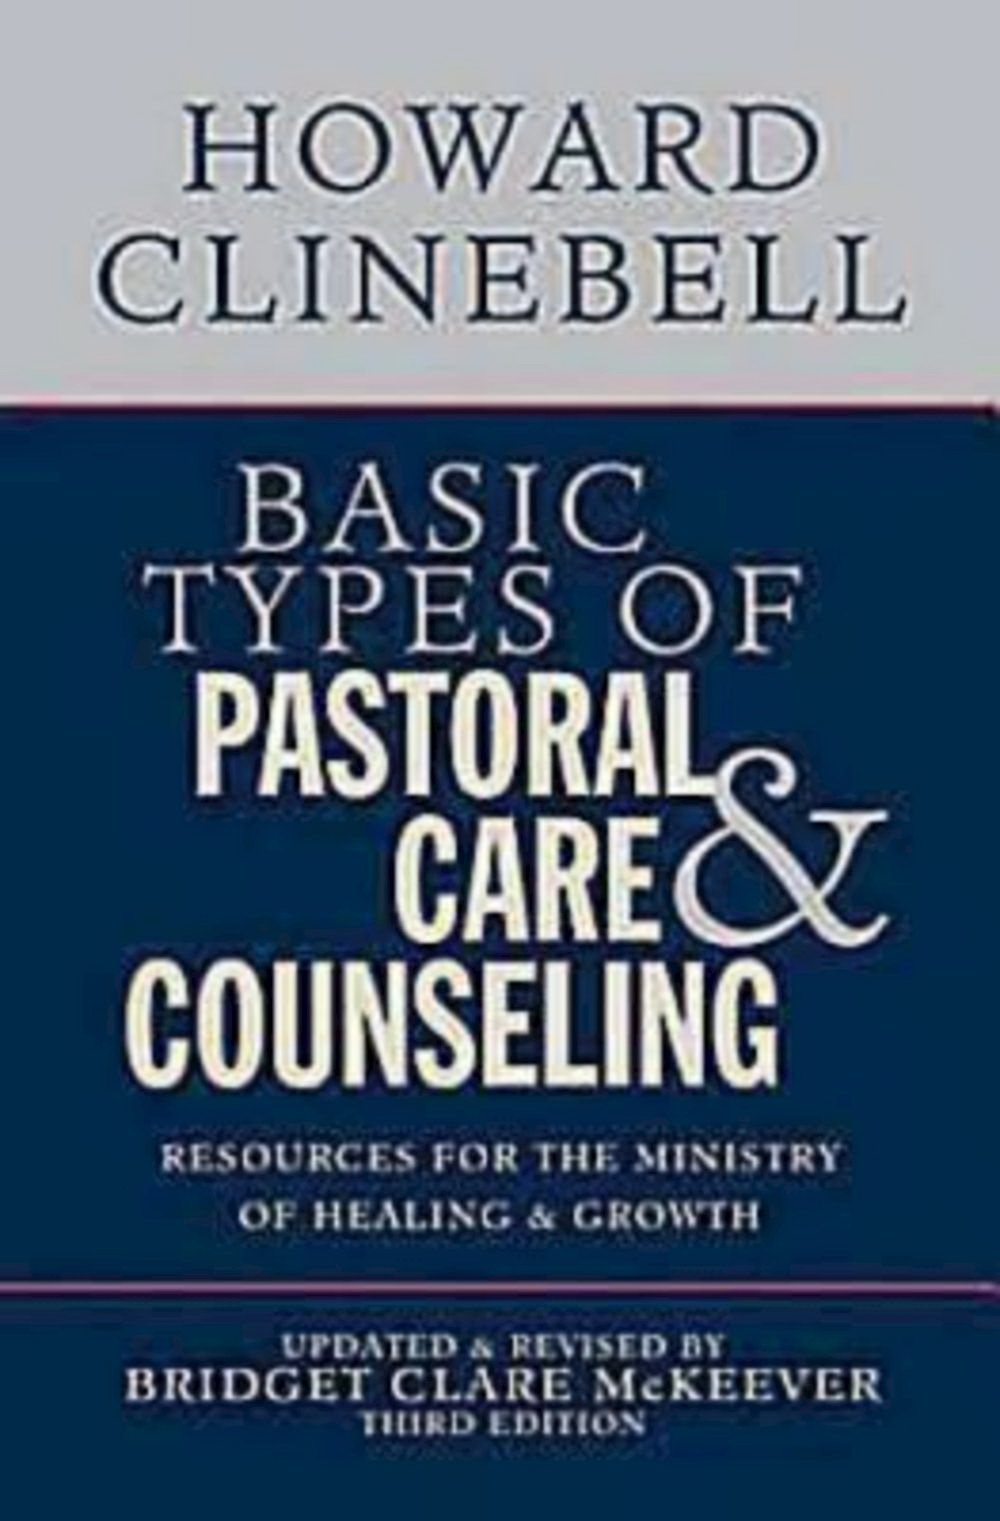 book review on pastoral care and counseling